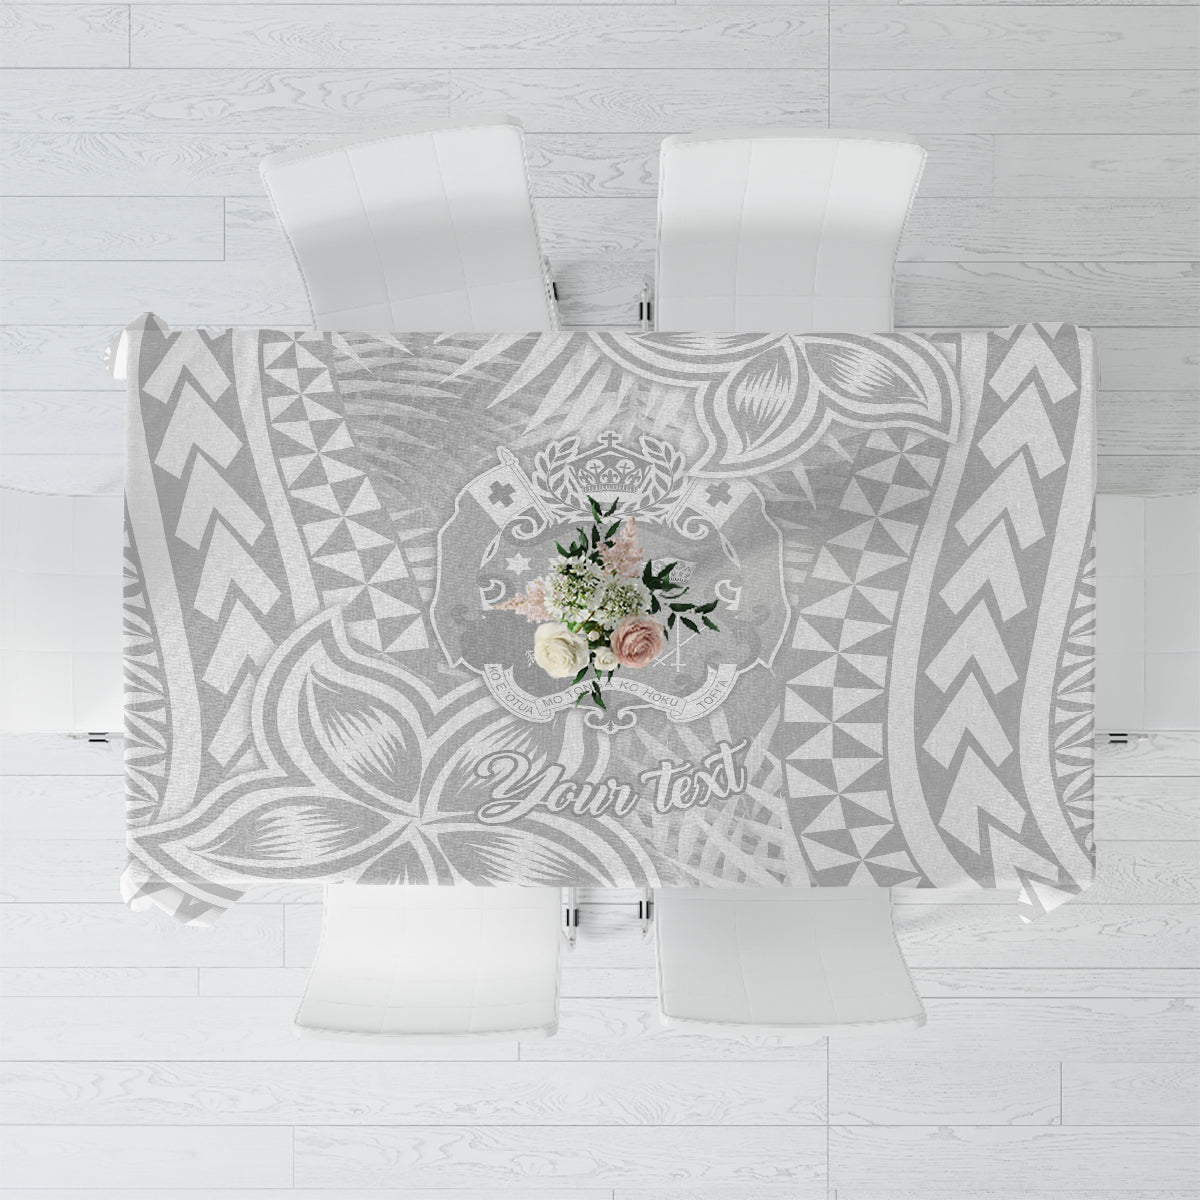 Personalised Tonga White Sunday Tablecloth Tropical Plant With Polynesian Pattern LT9 White - Polynesian Pride